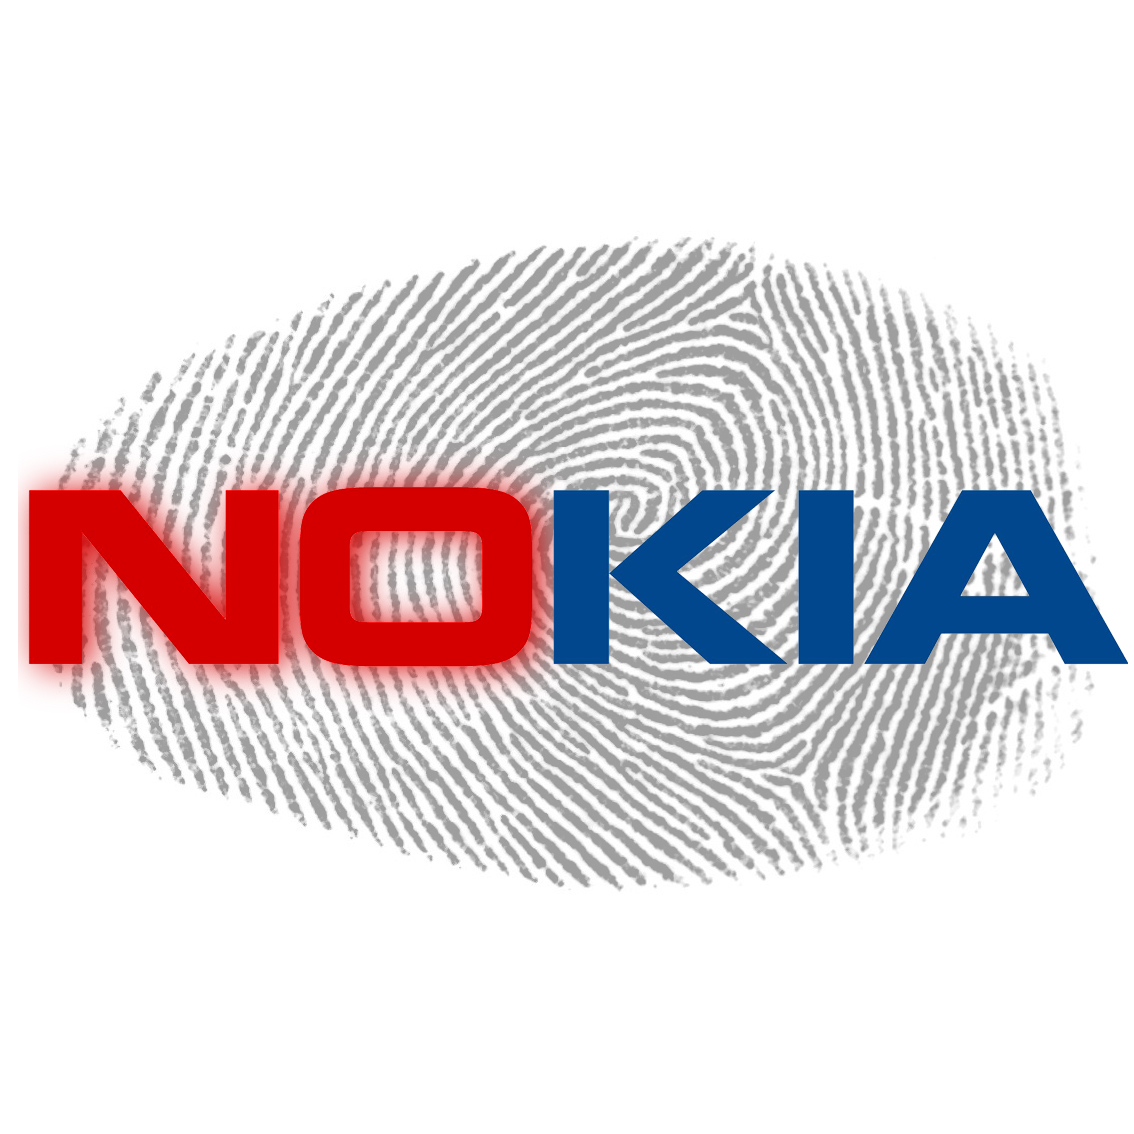 Nokia teases “easy-clean” screen technology – Say goodbye to smudges!